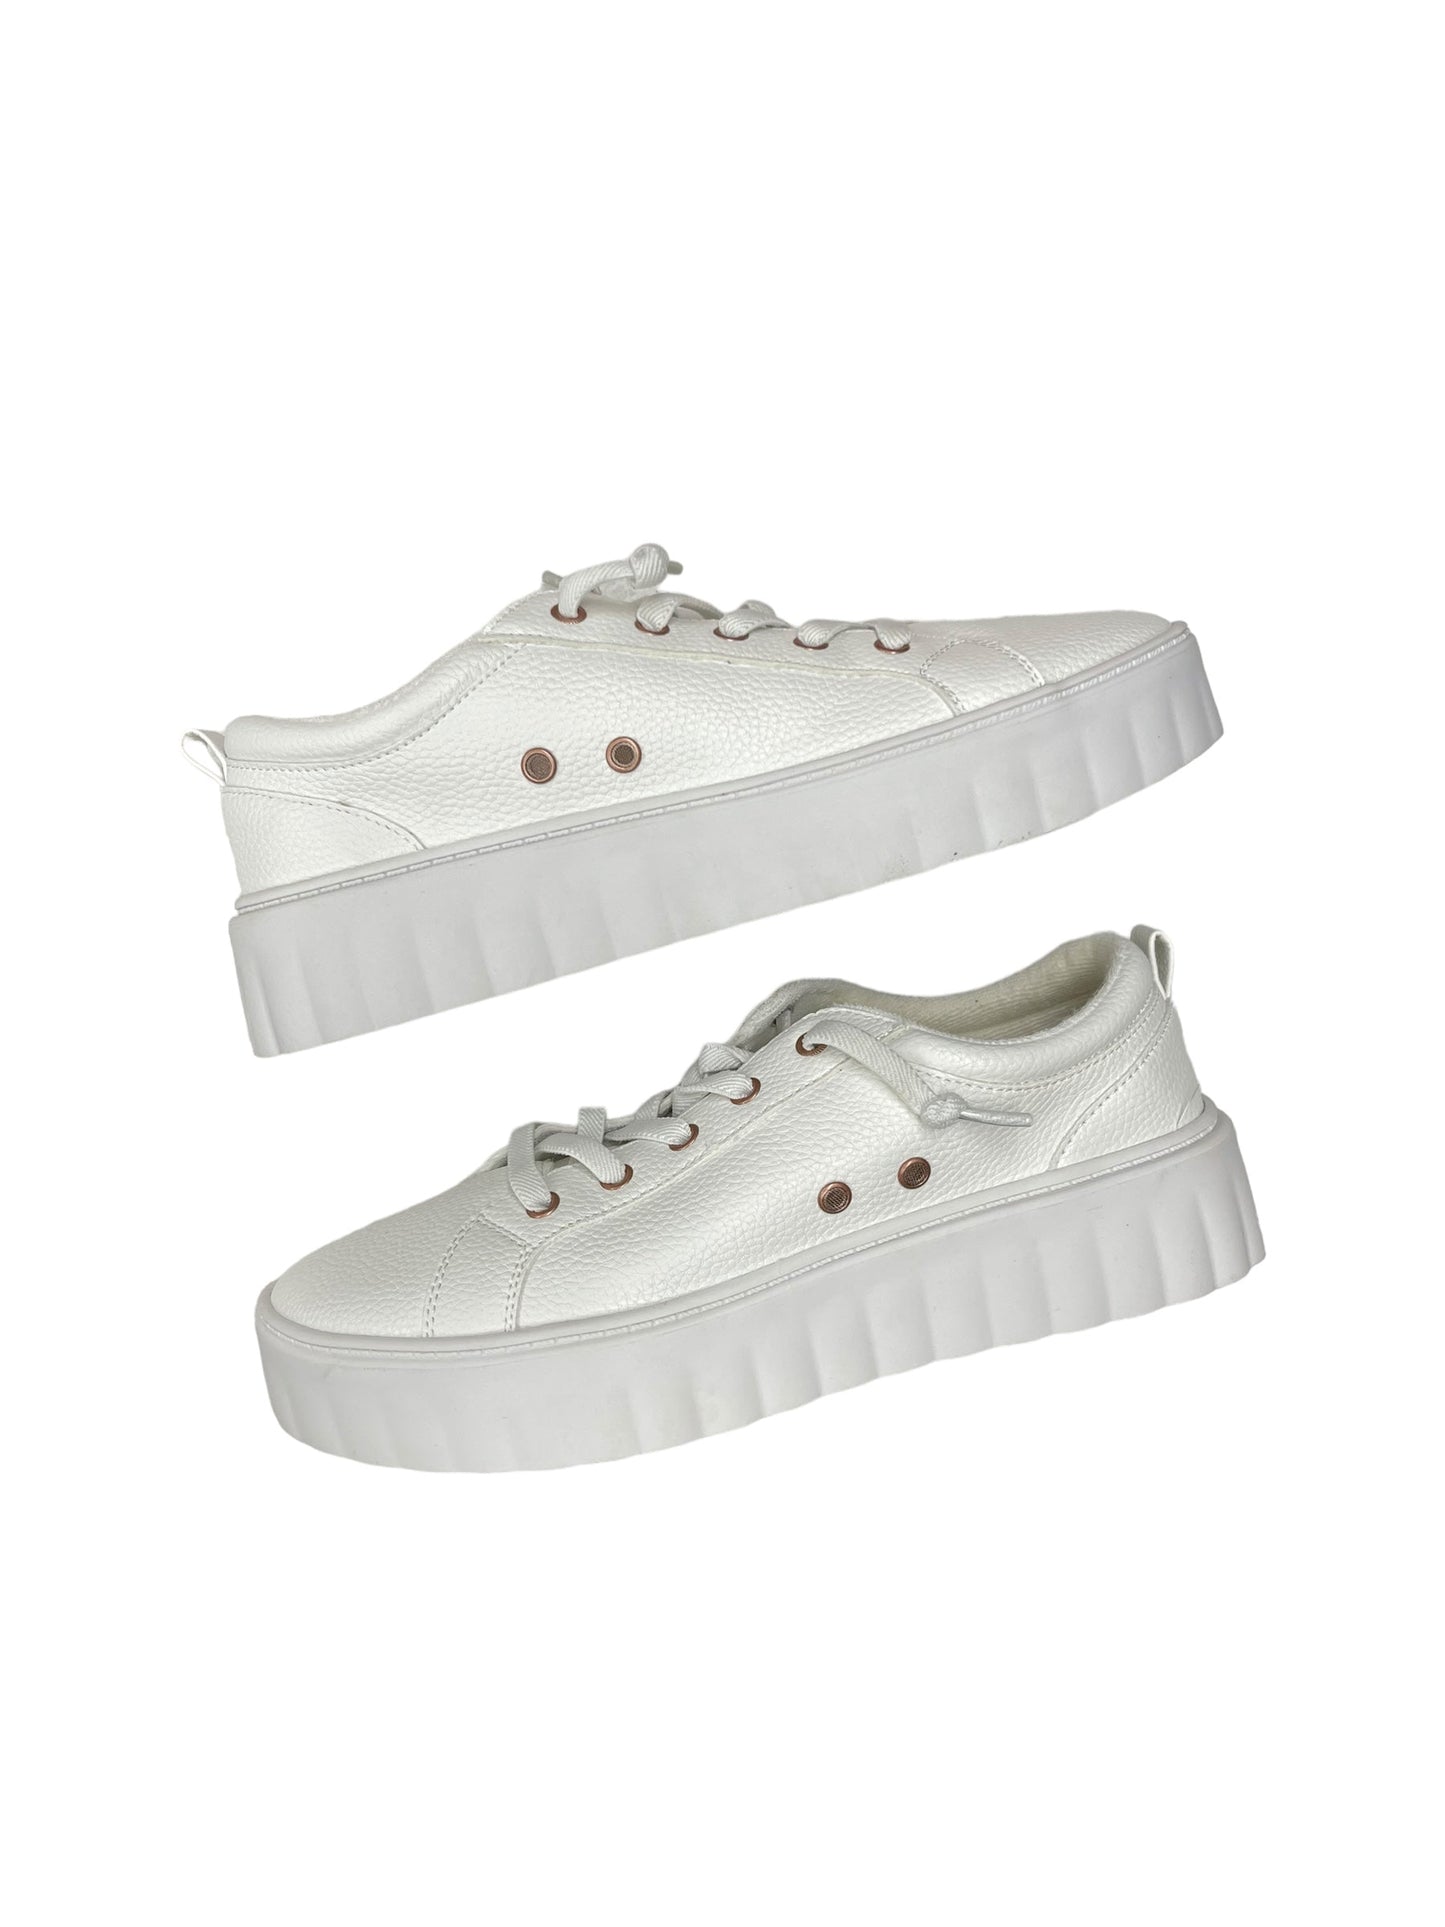 White Shoes Sneakers Roxy, Size 9